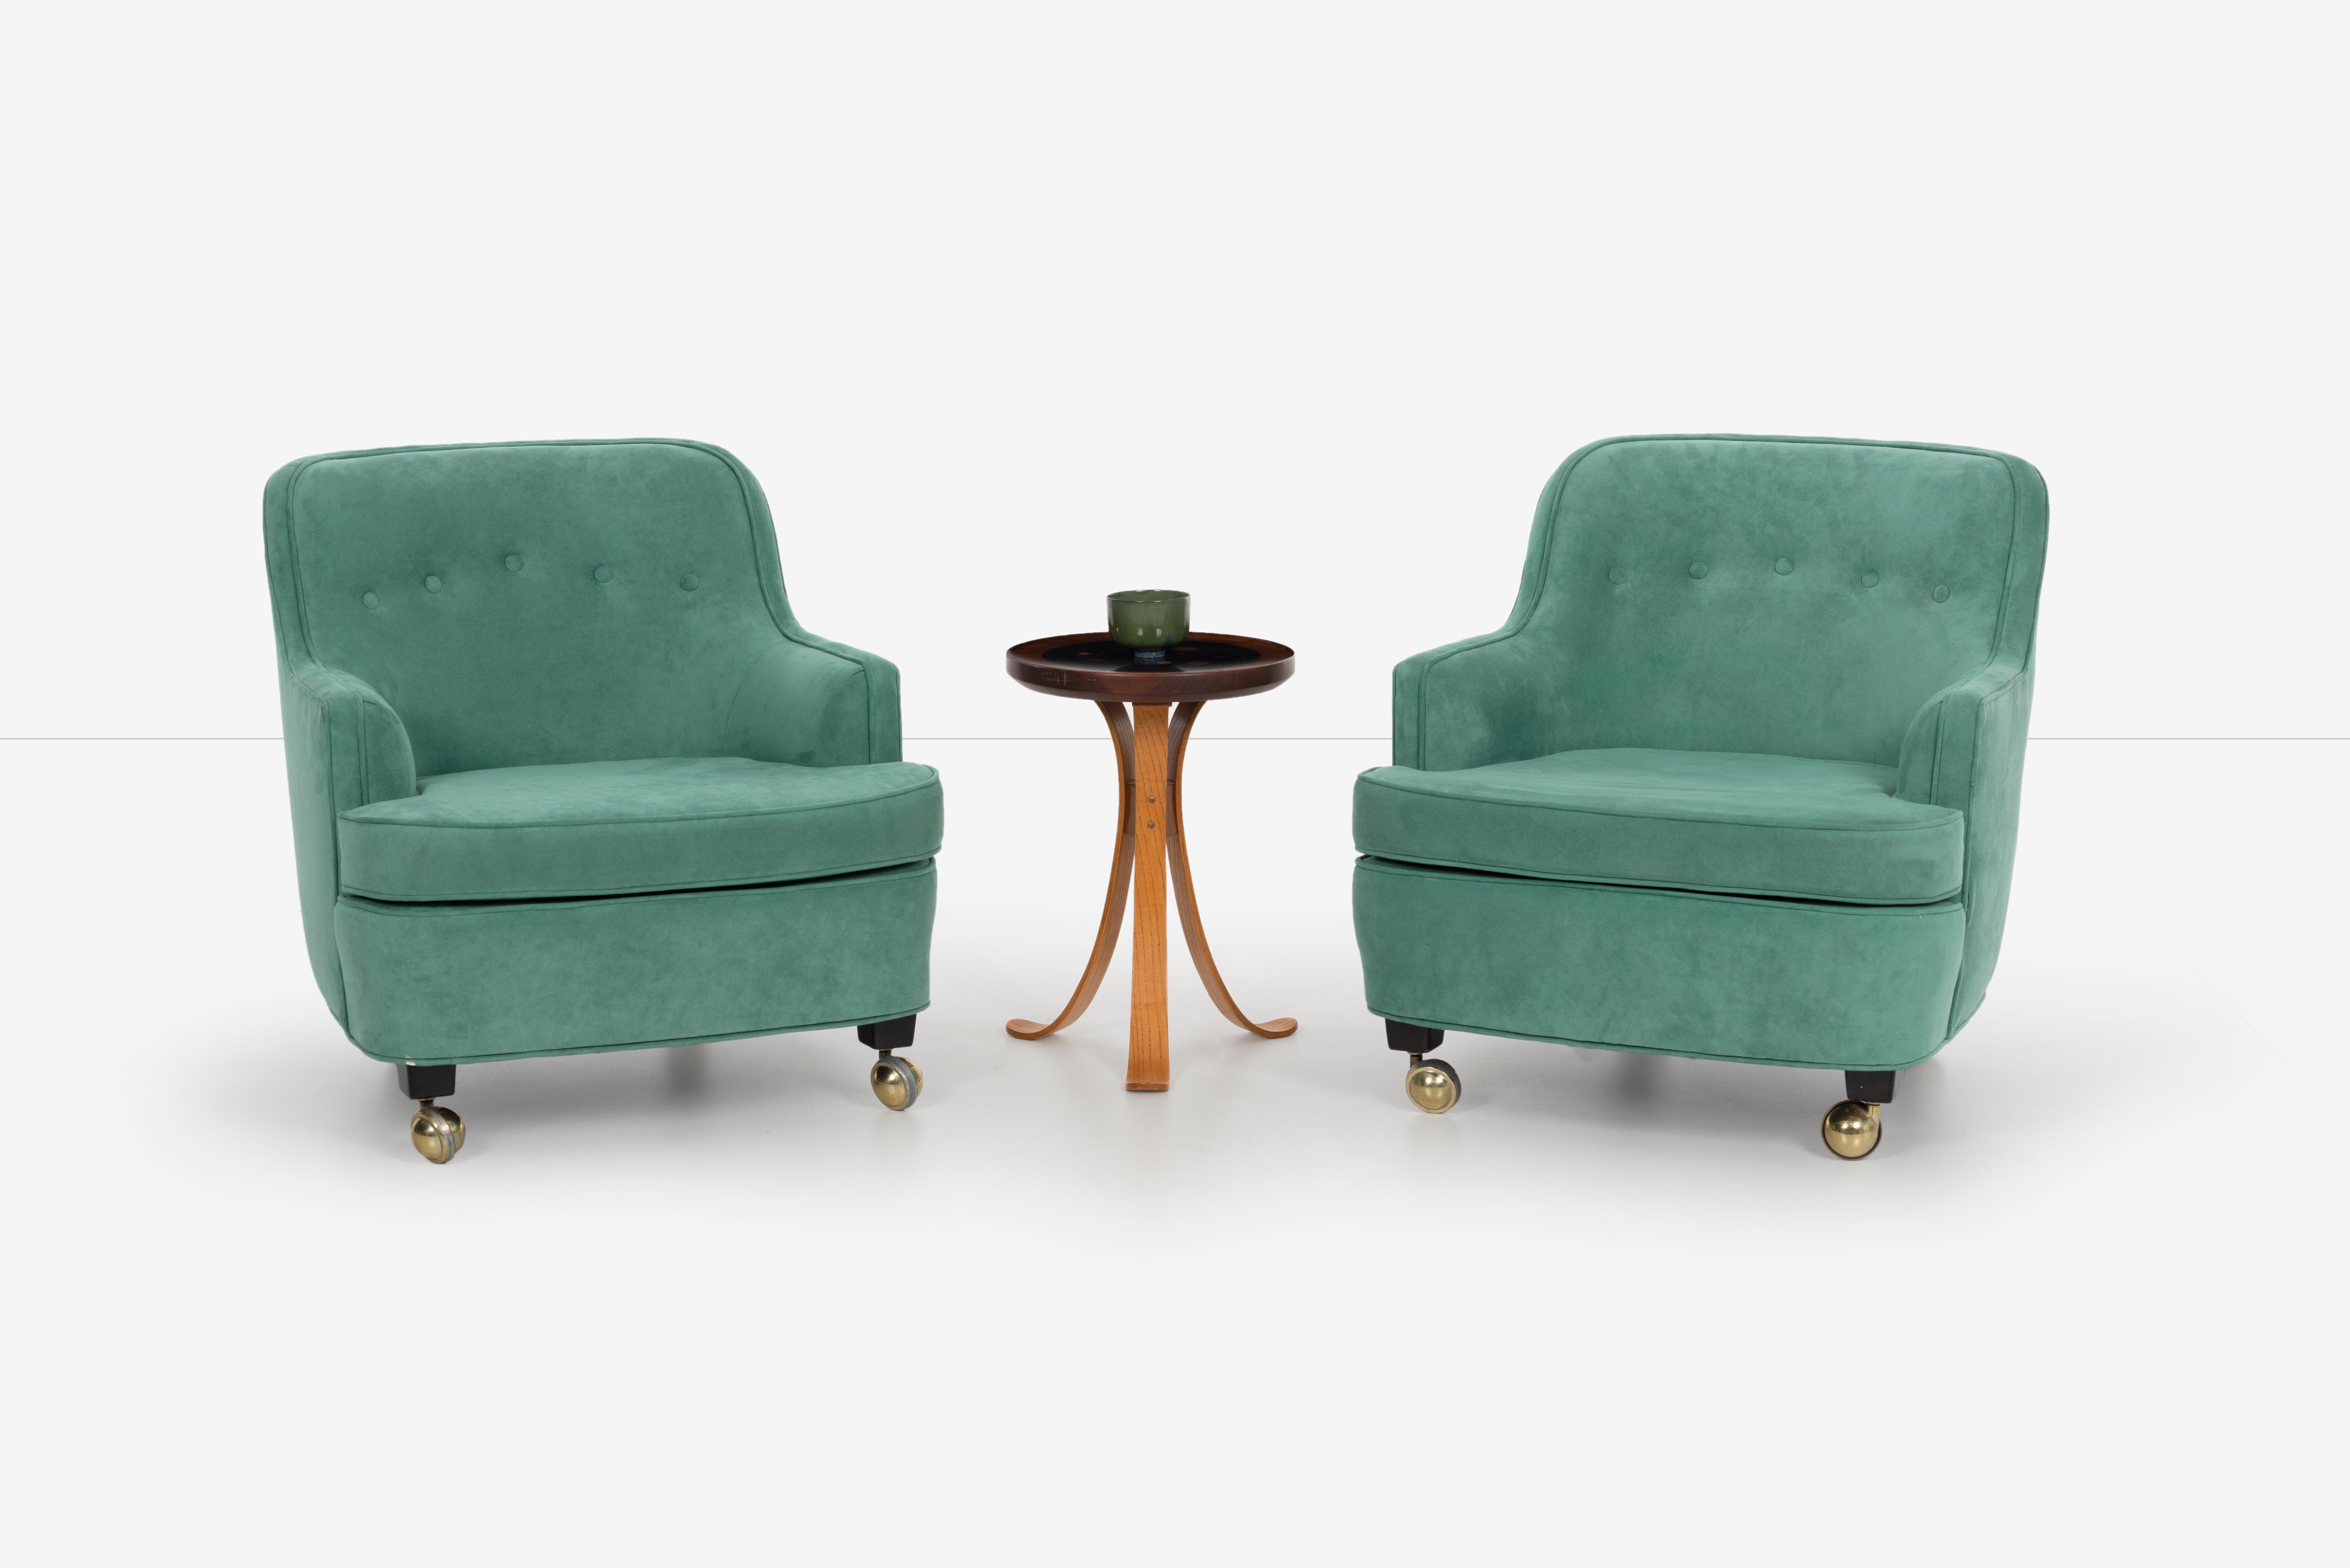 Upholstery Edward Wormley for Dunbar Pull-Up Lounge Chairs